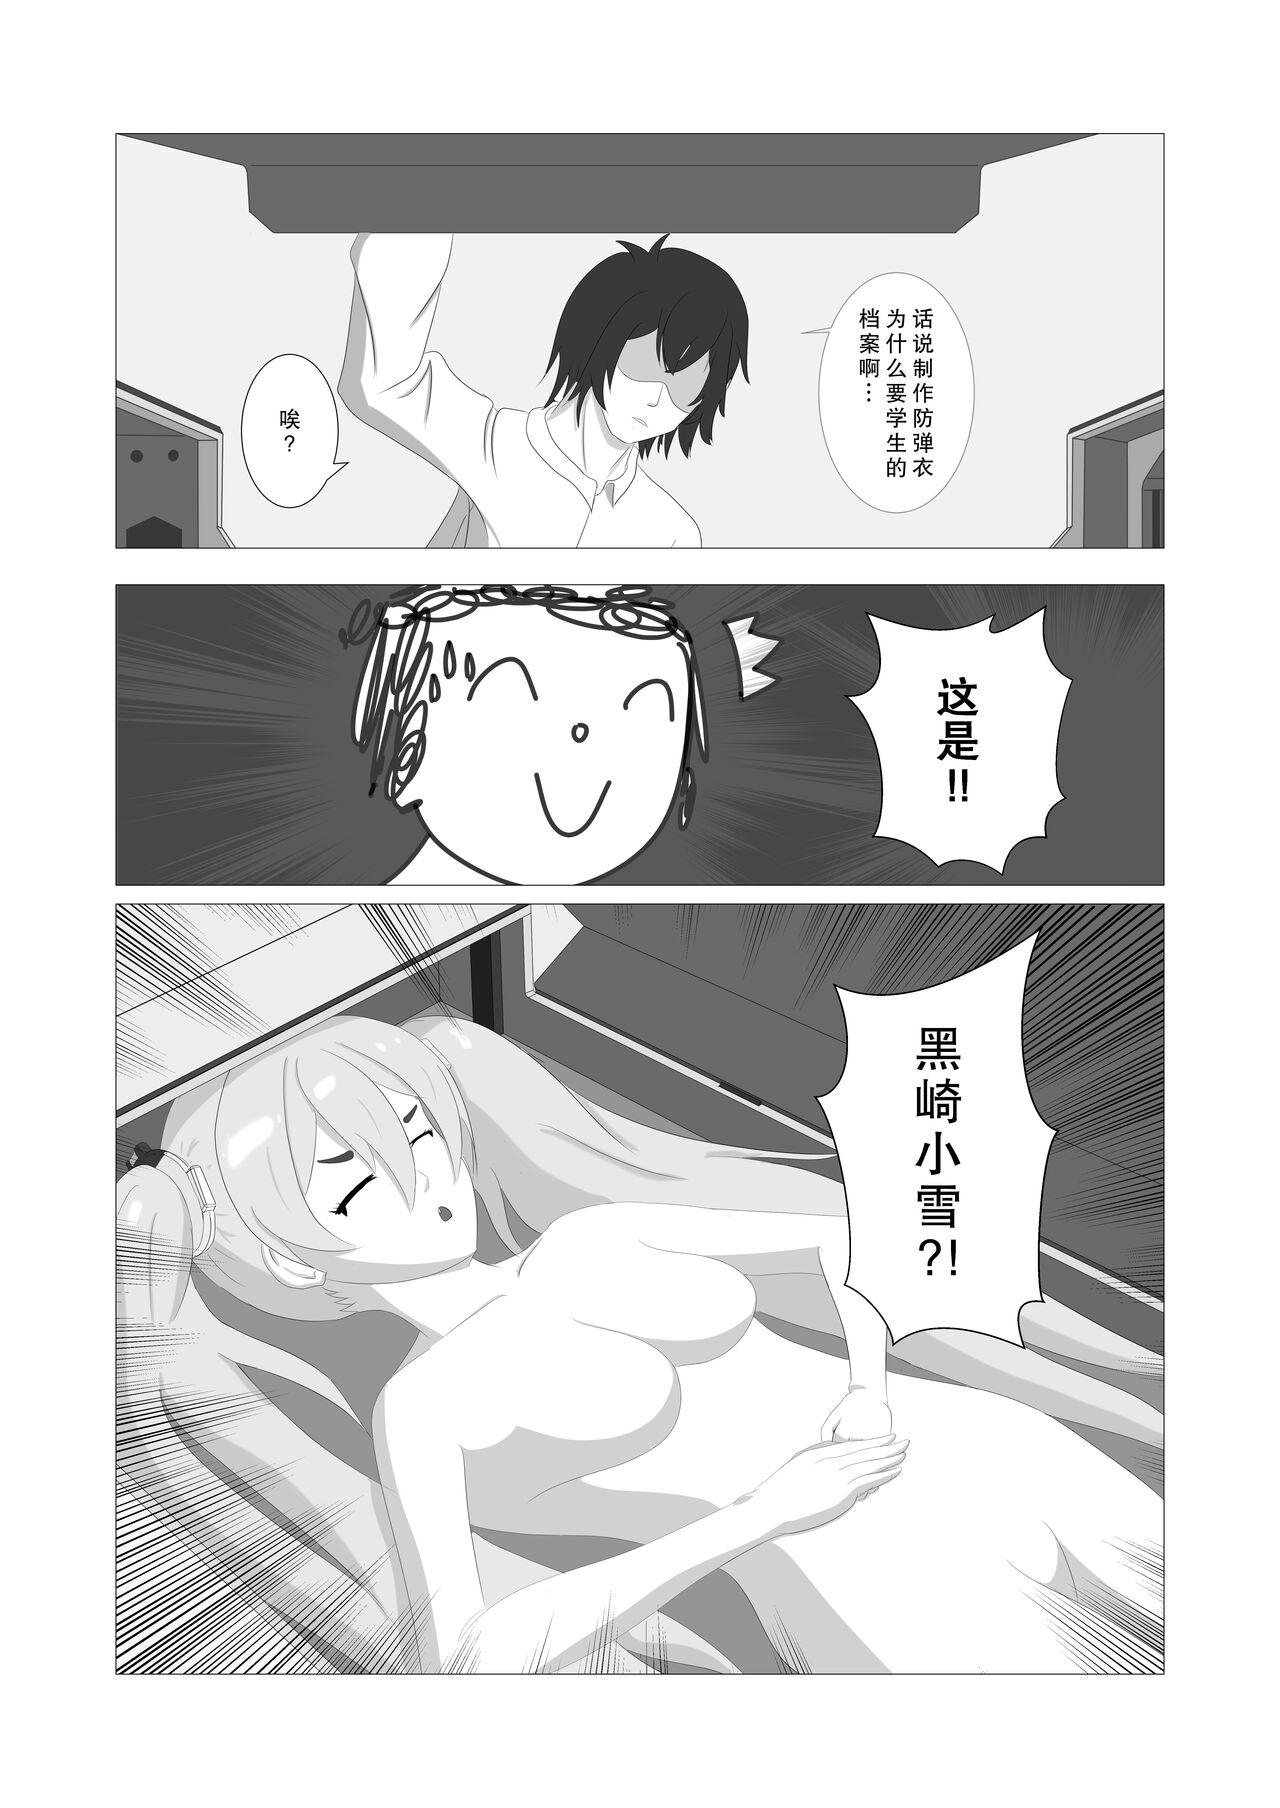 Spreading 皮物档案 - Blue archive Lesbo - Page 4